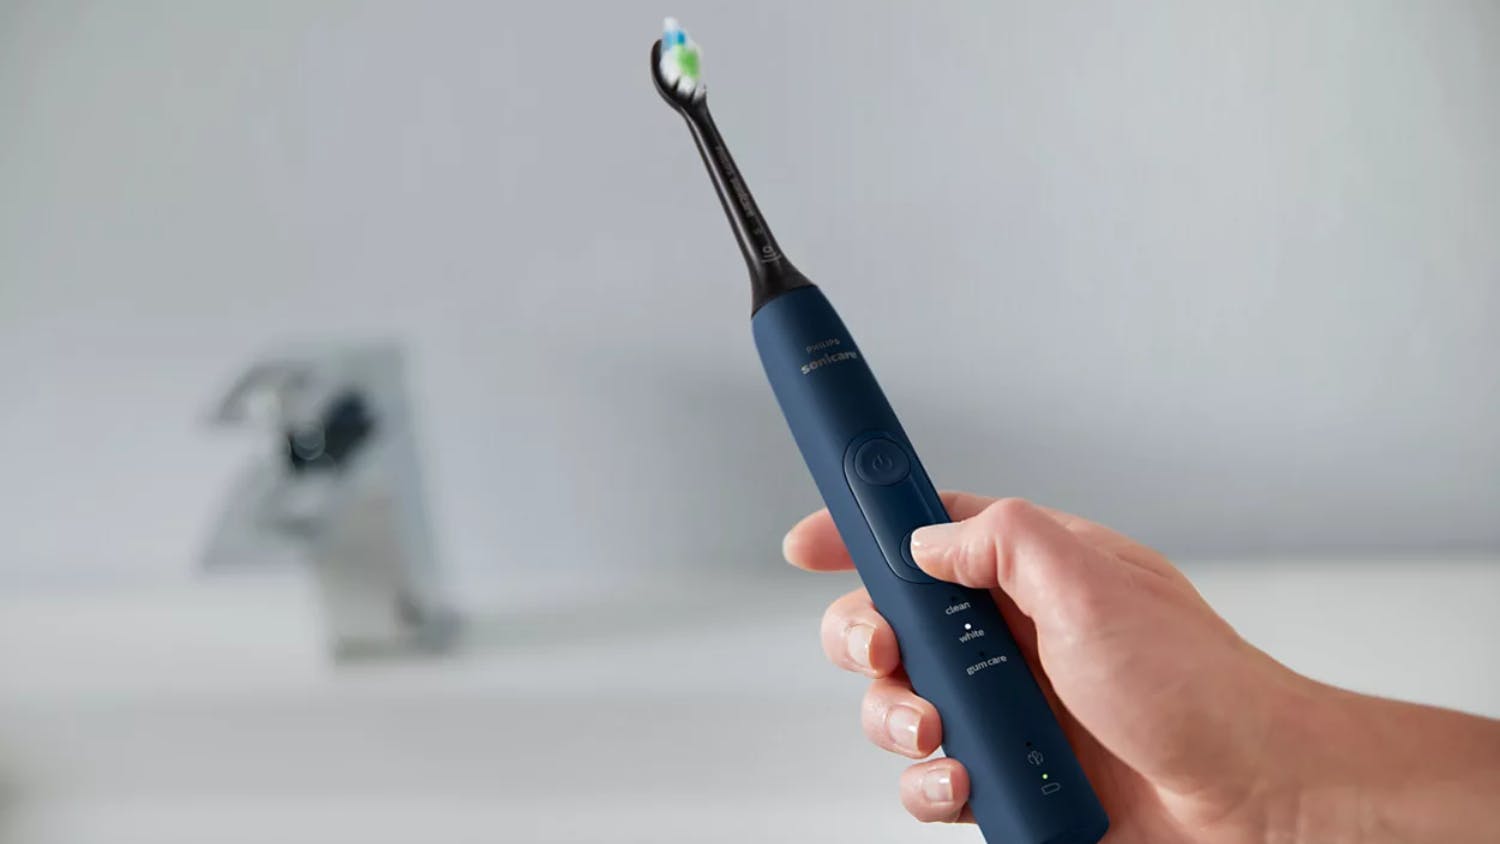 Philips Sonicare ProtectiveClean 5100 Electric Toothbrush with Travel Case - Navy Blue (HX6851/56)